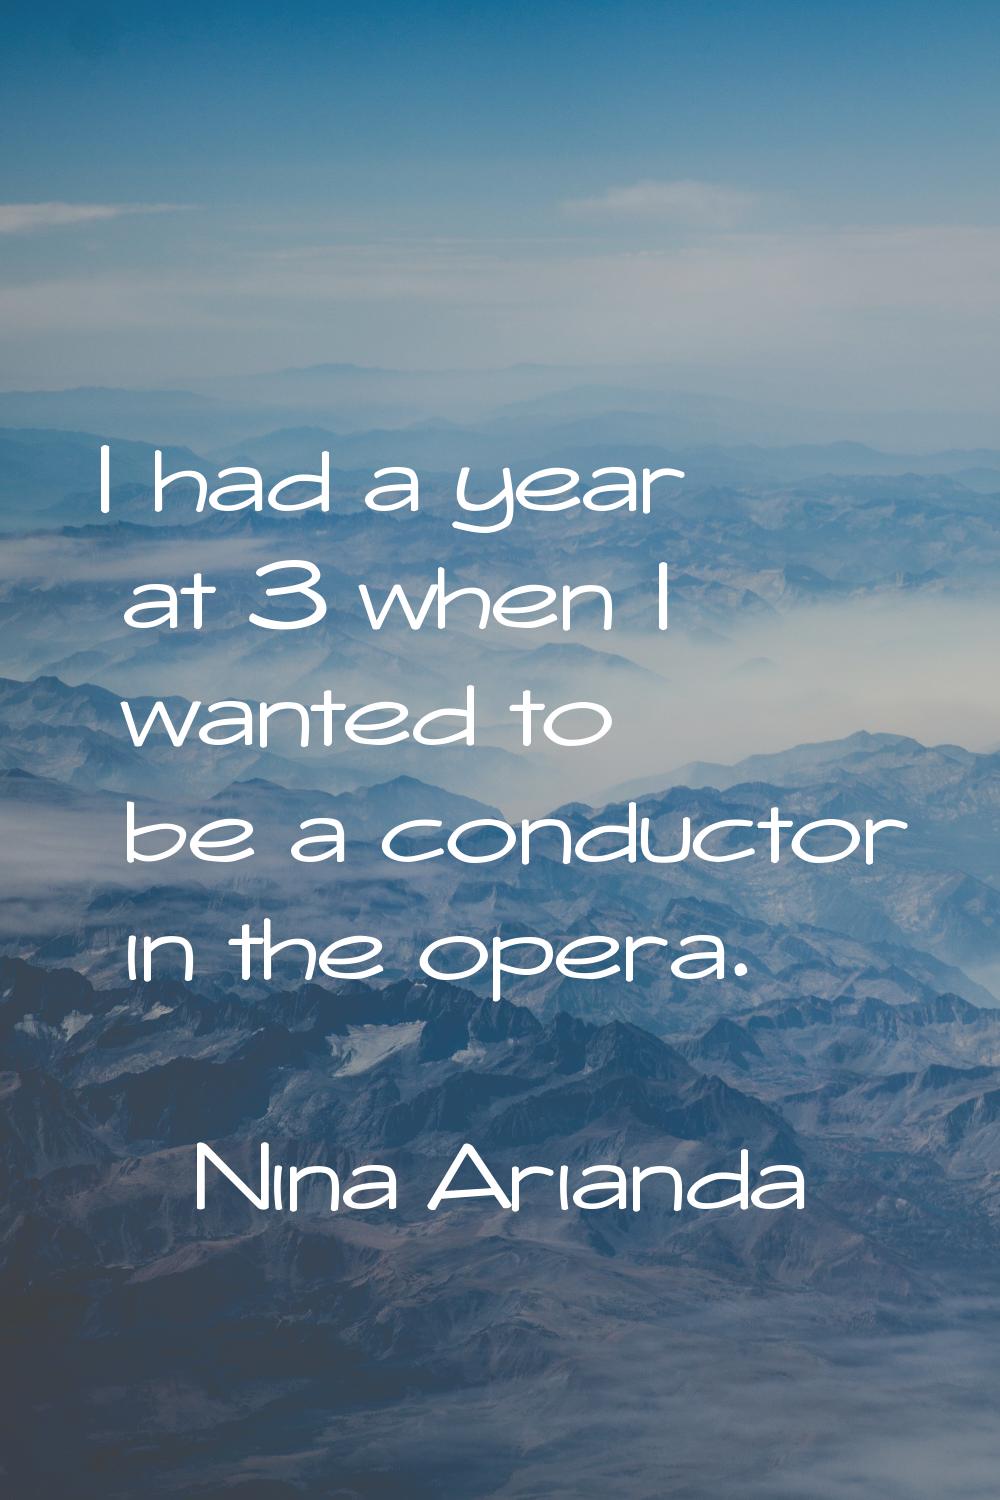 I had a year at 3 when I wanted to be a conductor in the opera.